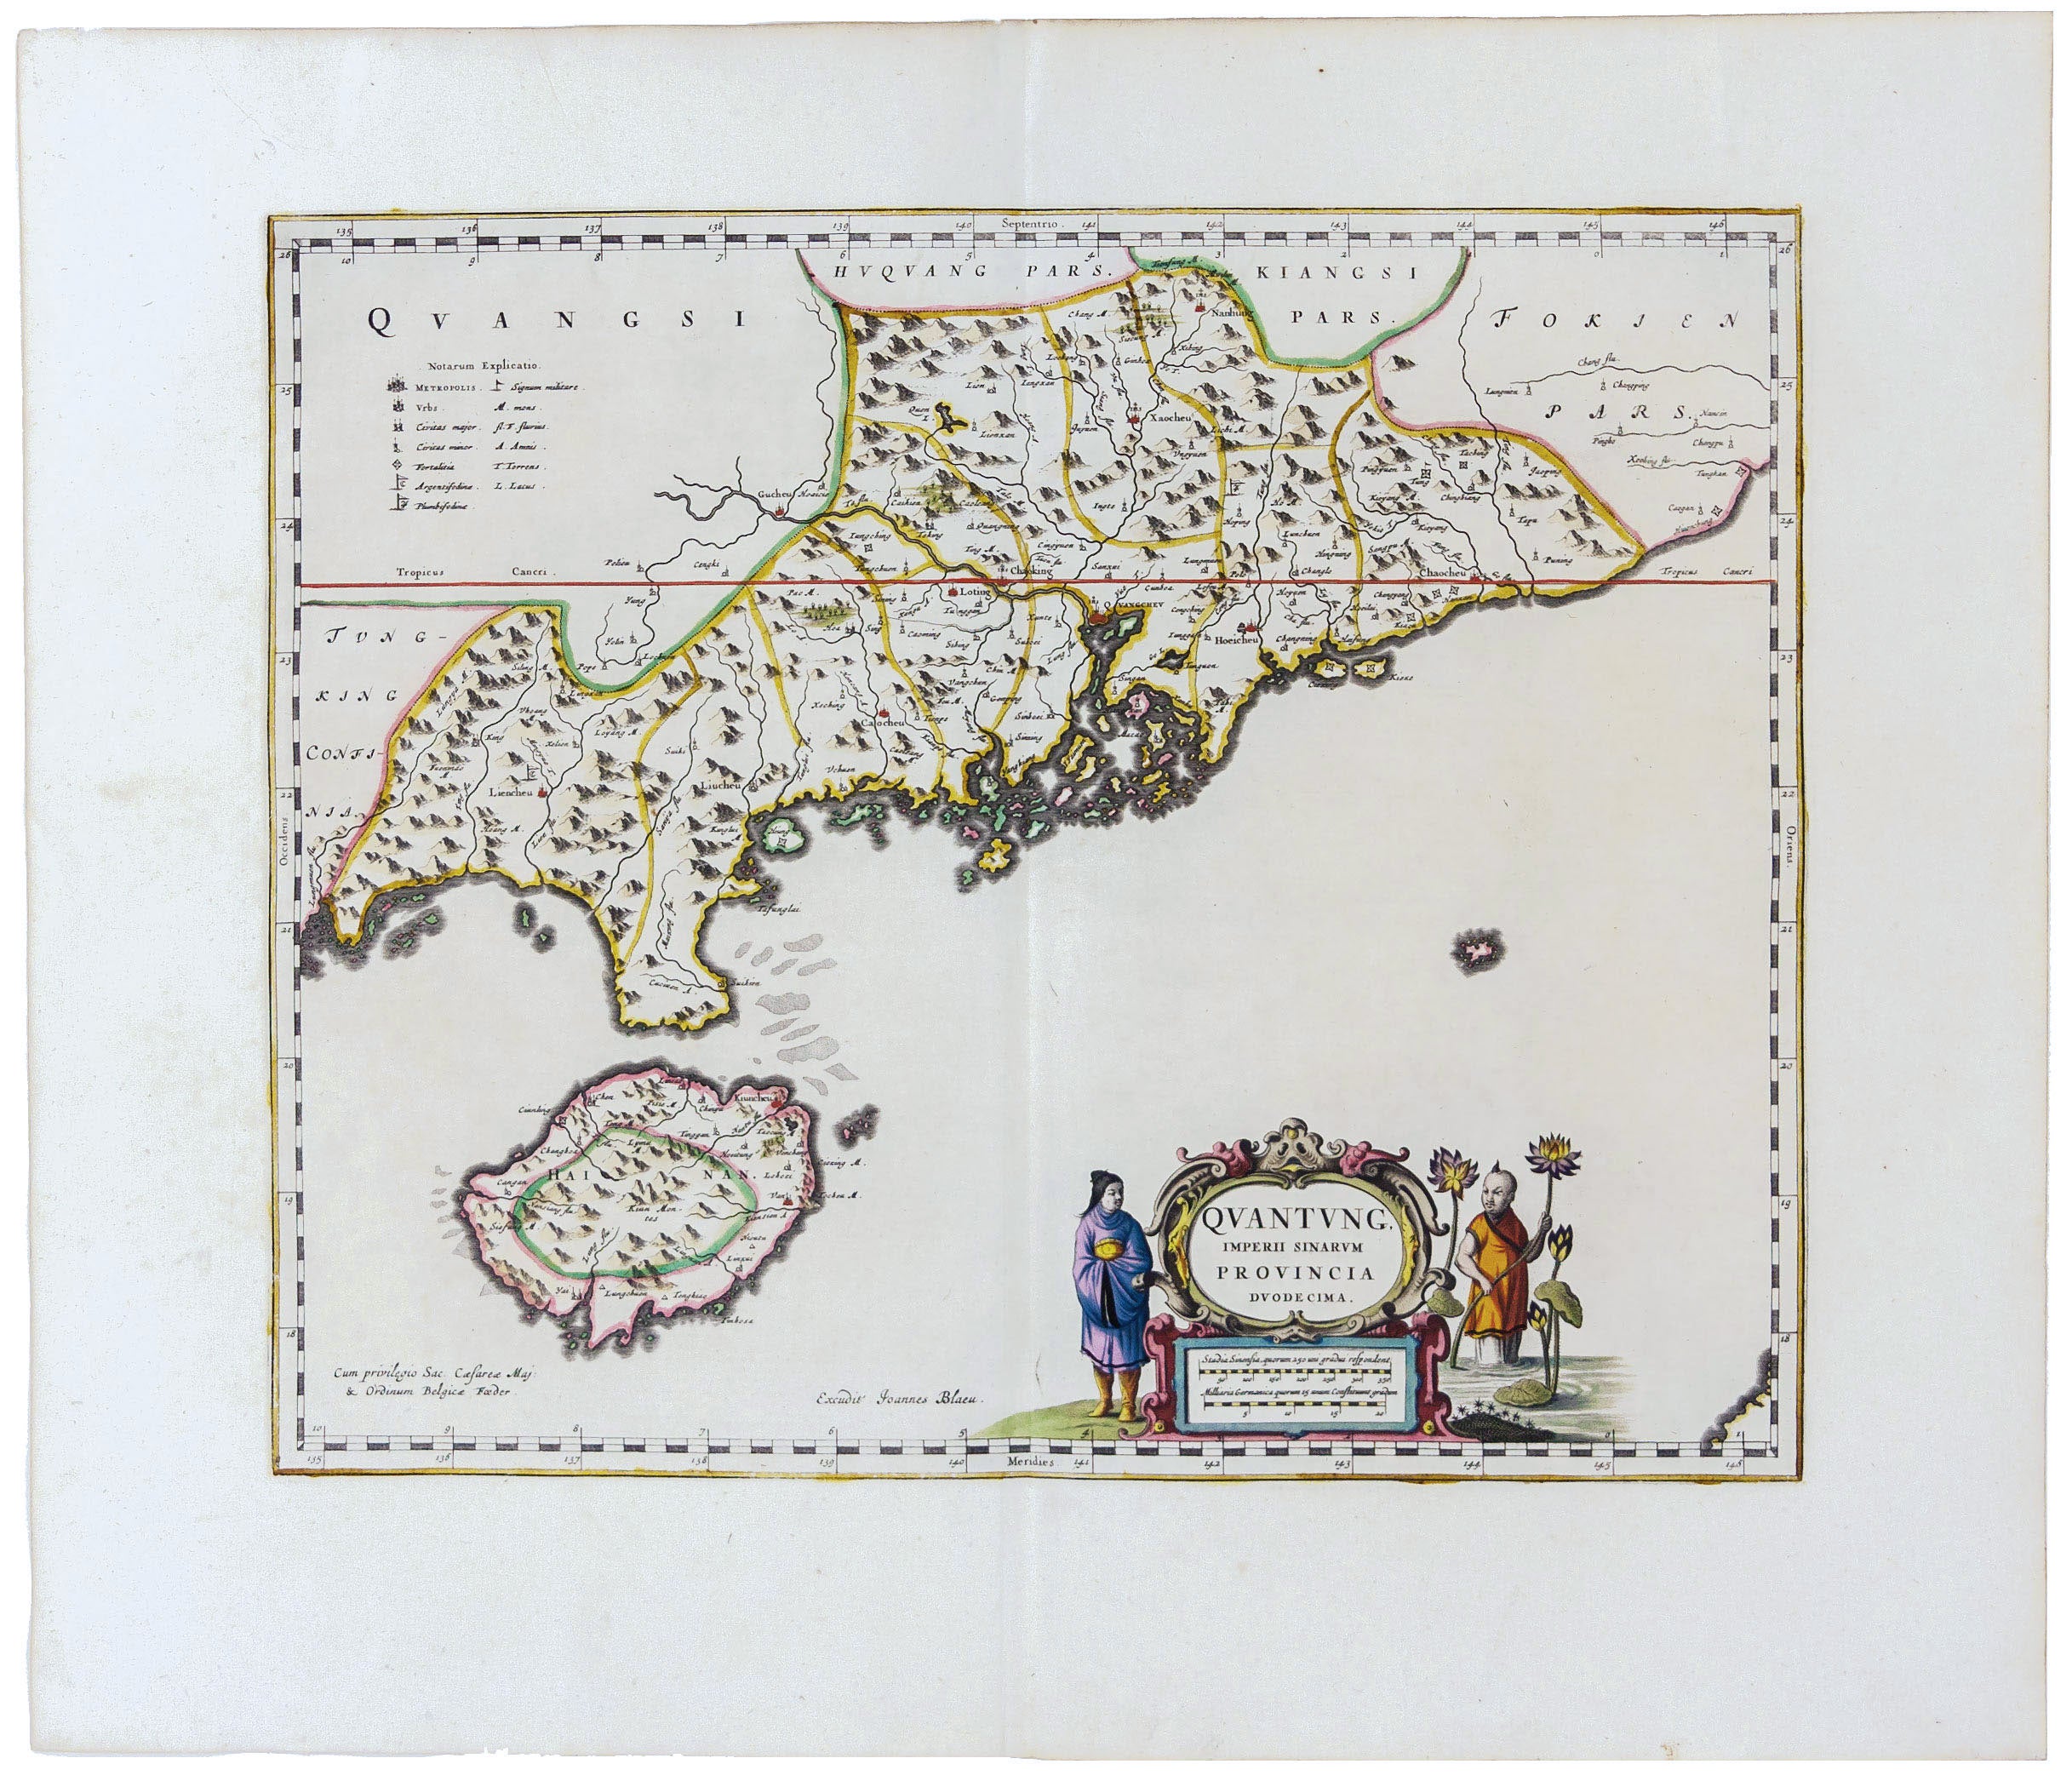 Pristine Example of the Earliest Hong Kong Area Map